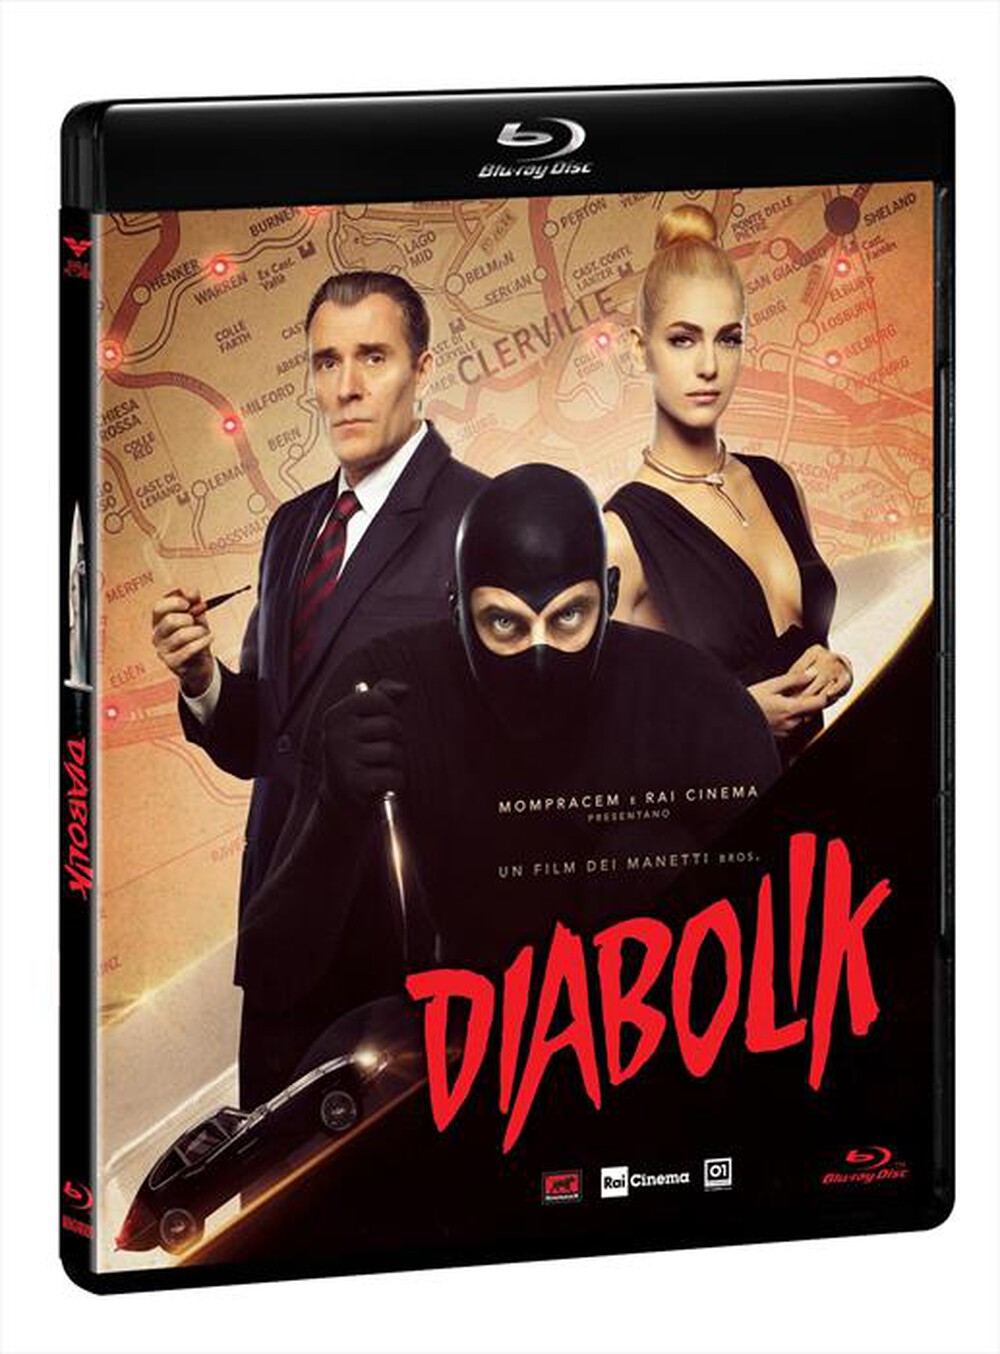 "EAGLE PICTURES - Diabolik (Blu-Ray+Card)"